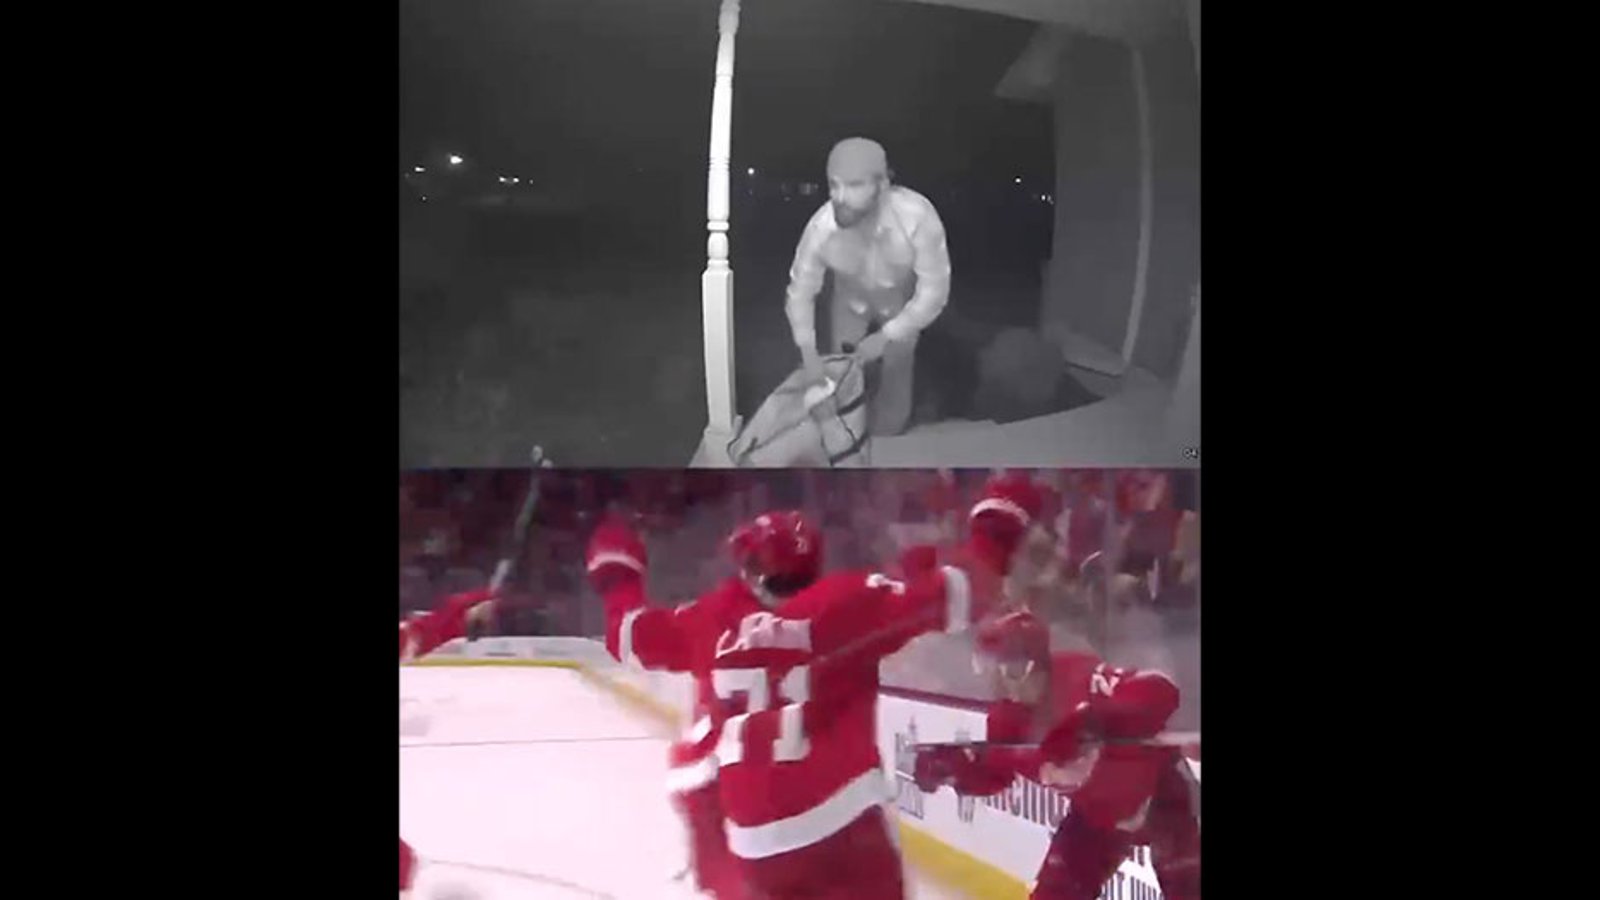 Hilarious moment when delivery guy gets surprised by Lucas Raymond goal